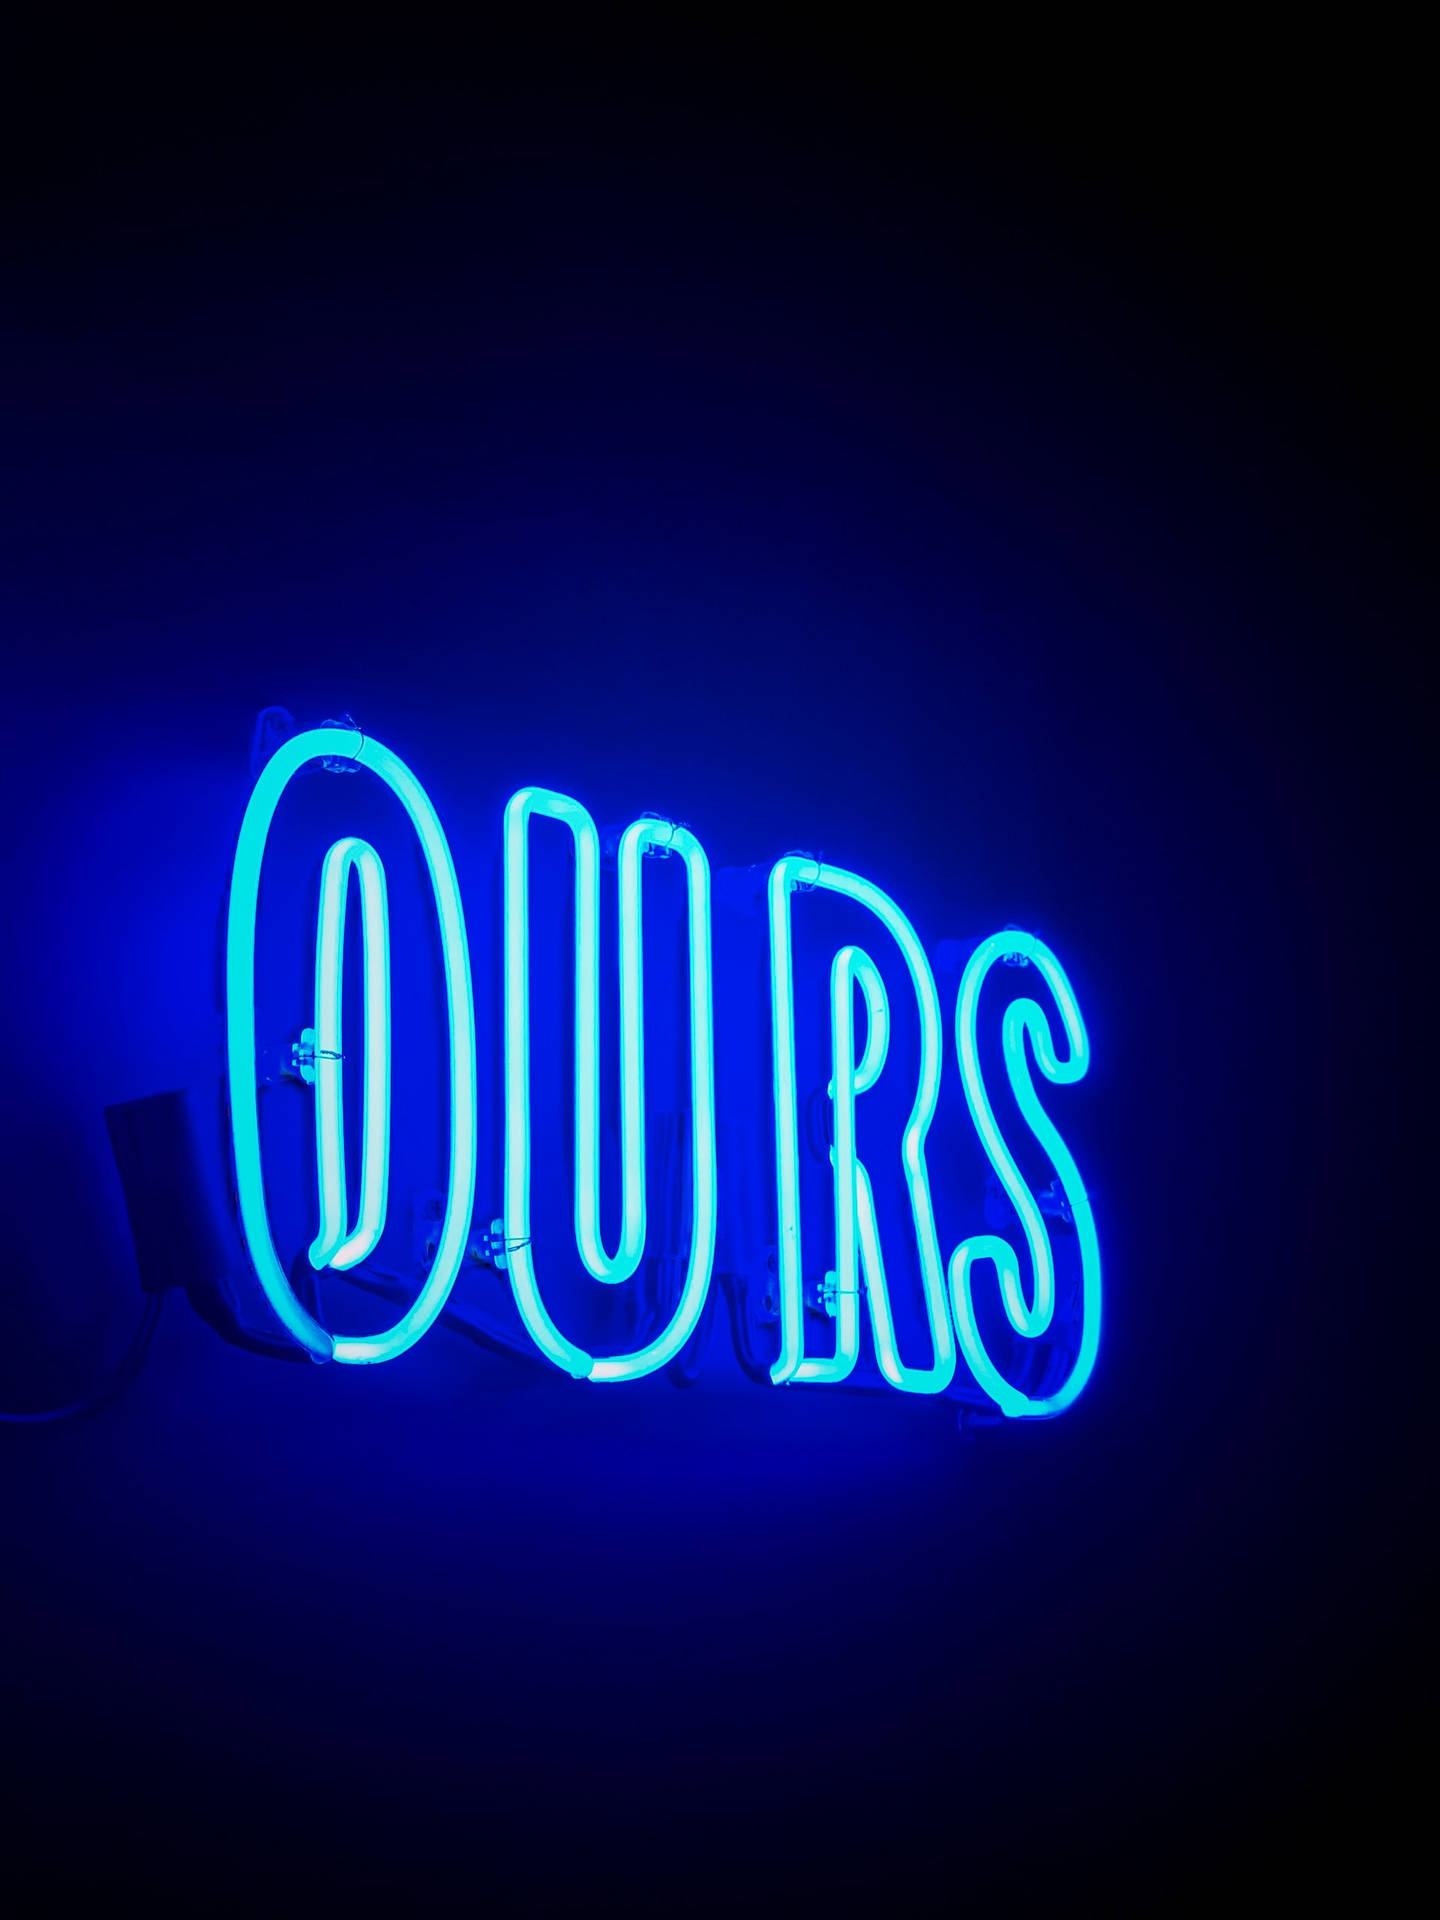 "Ours" In Neon Blue iPhone Wallpaper